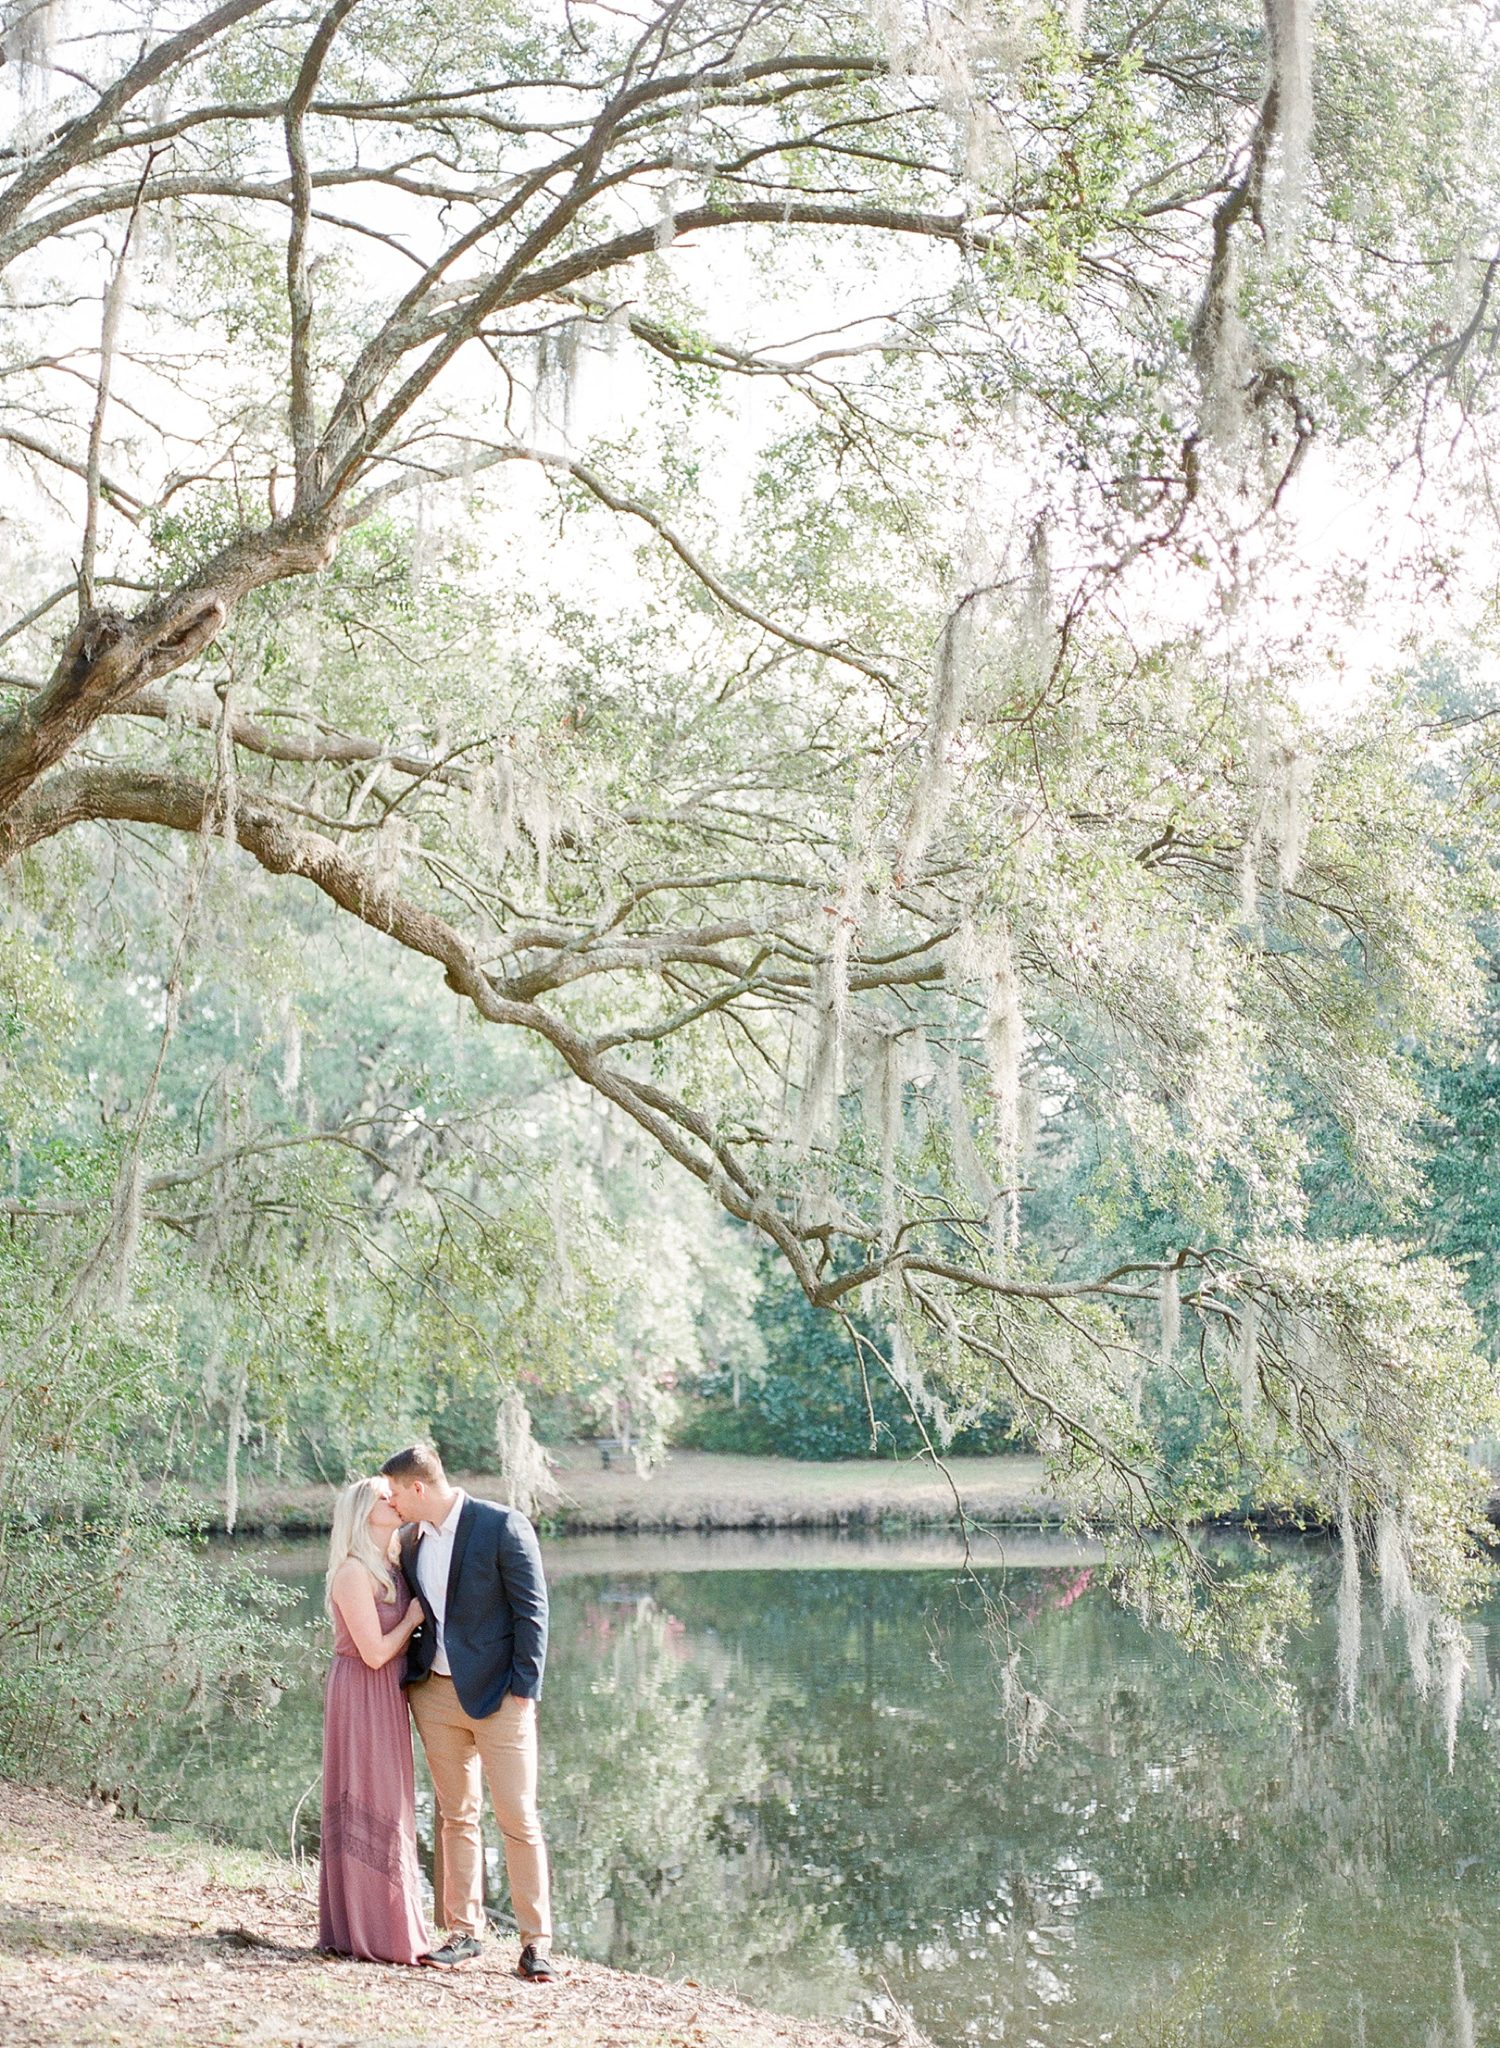 A romantic anniversary session is photographed at the historic wedding venue of Legare Waring House in Charleston, SC